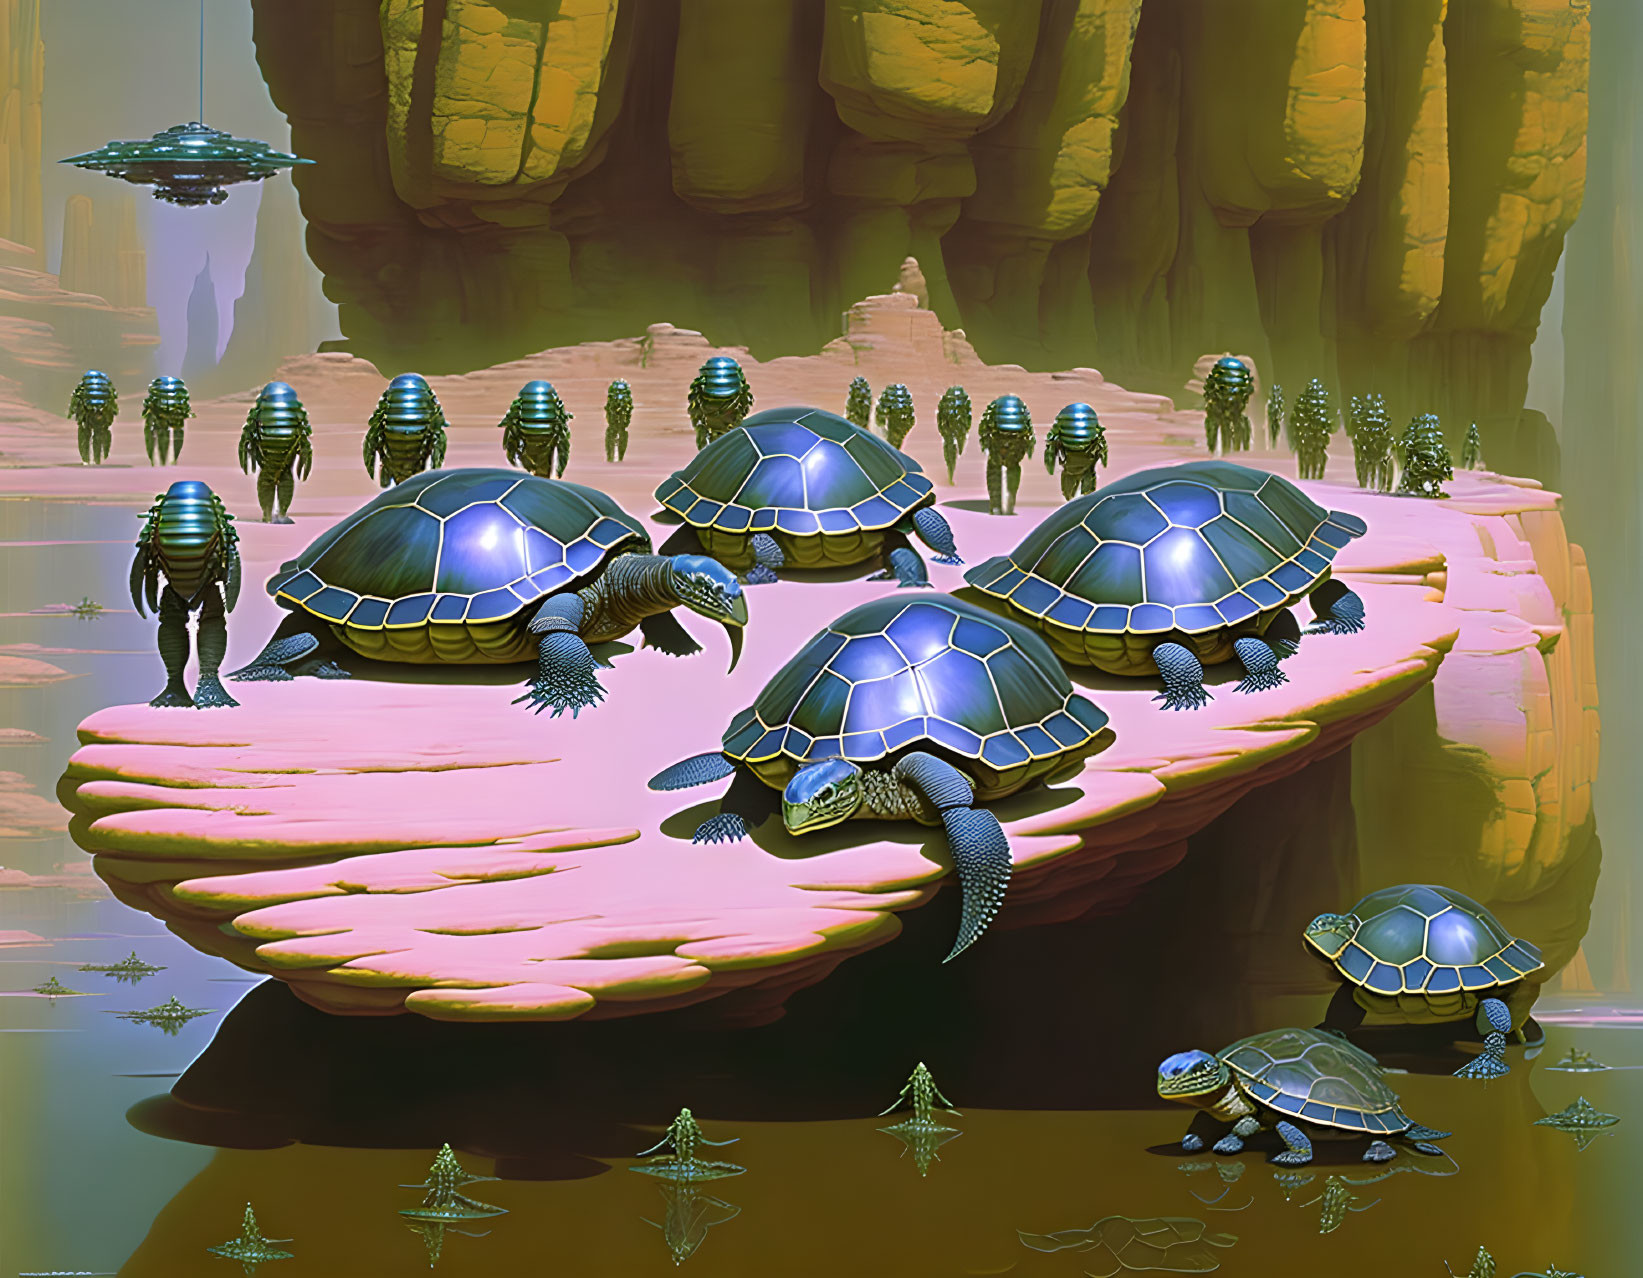 Fantastical oversized turtles, humanoid figures, and floating ships on sandy plateau.